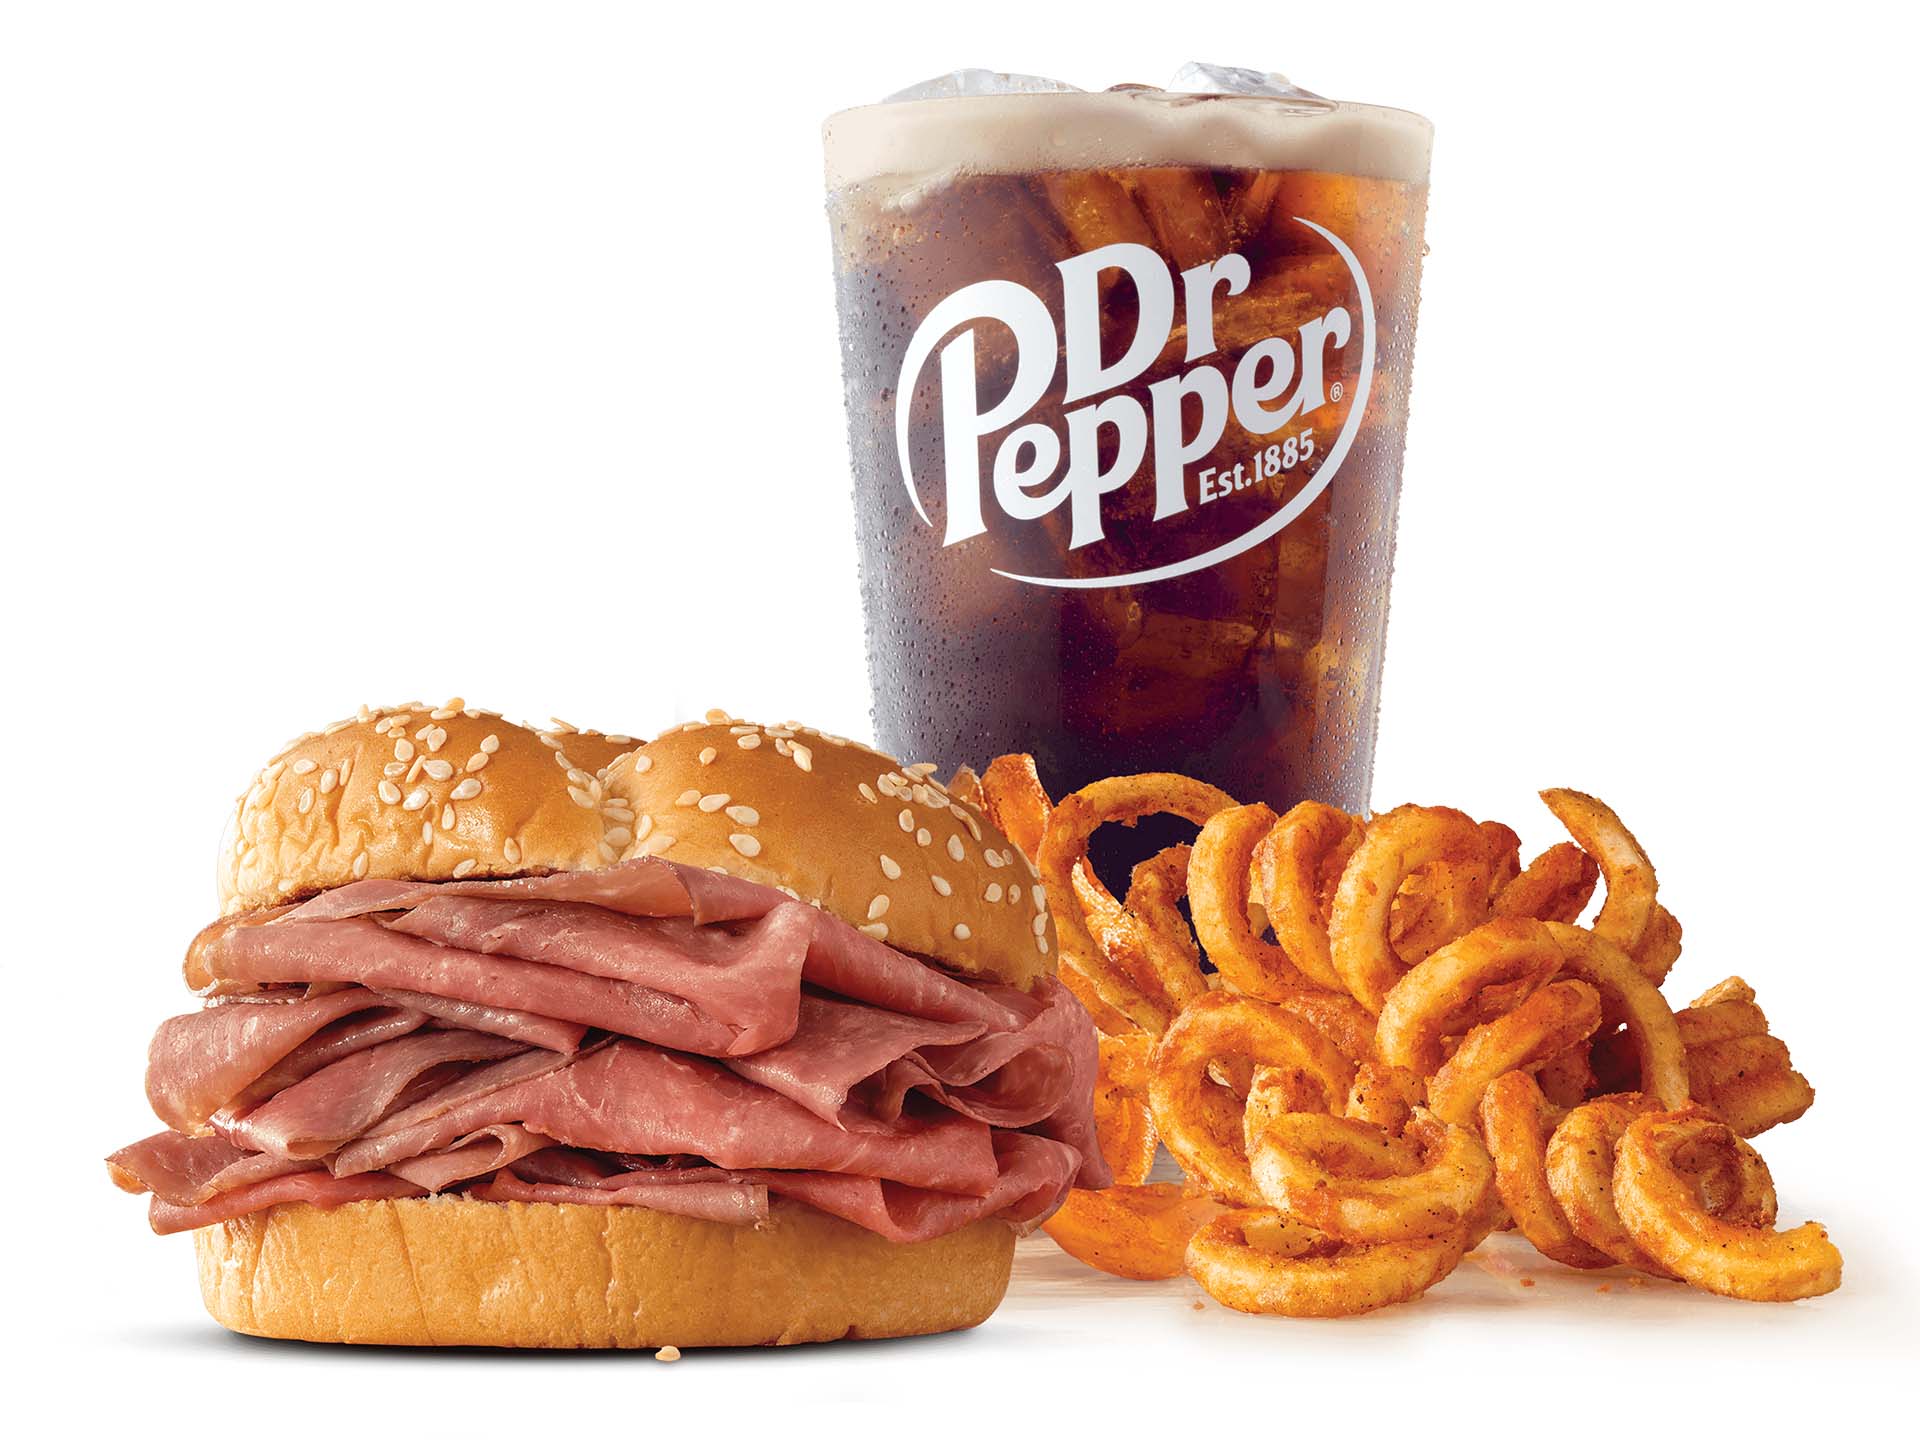 Arby's classic roast beef meal in Perth Amboy, NJ